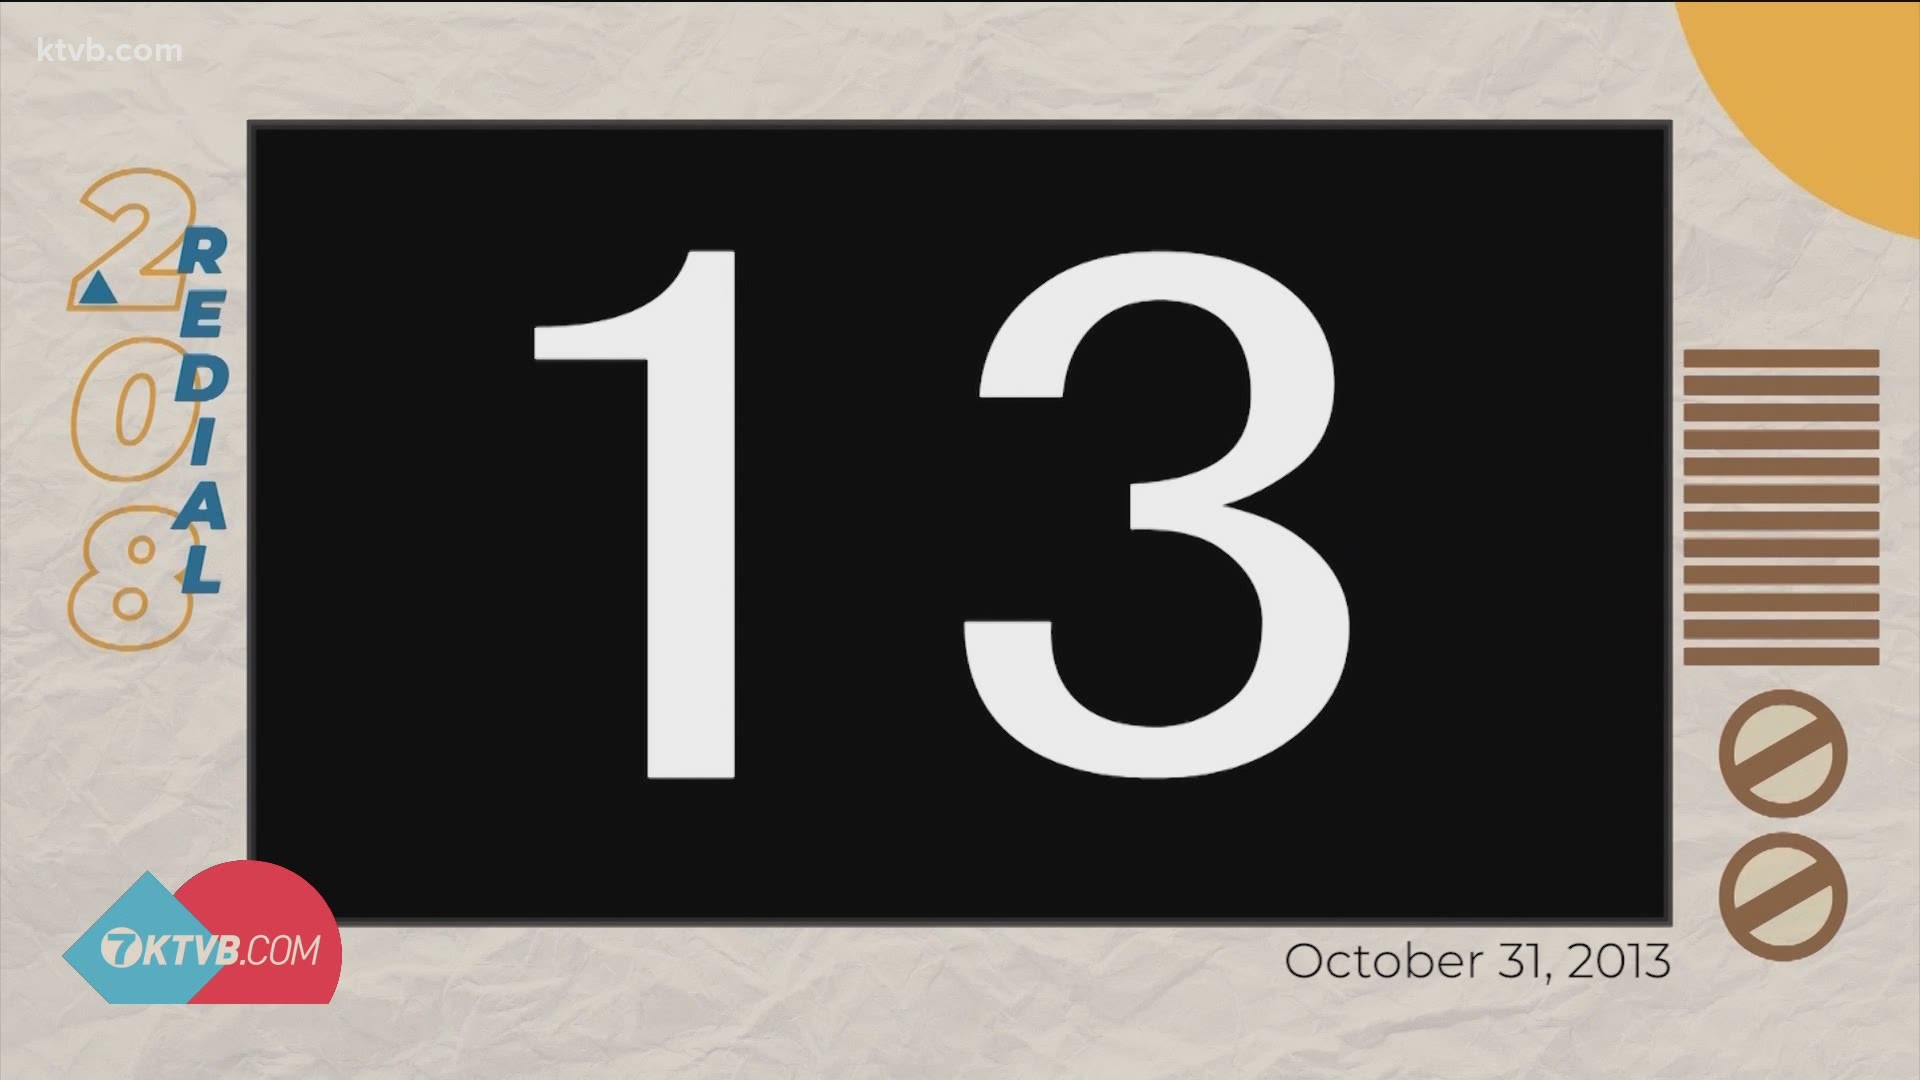 In 2013, Brian Holmes spoke with two law partners about the superstition surrounding number 13. Today, on Friday the 13th, we thought we'd revisit that story.